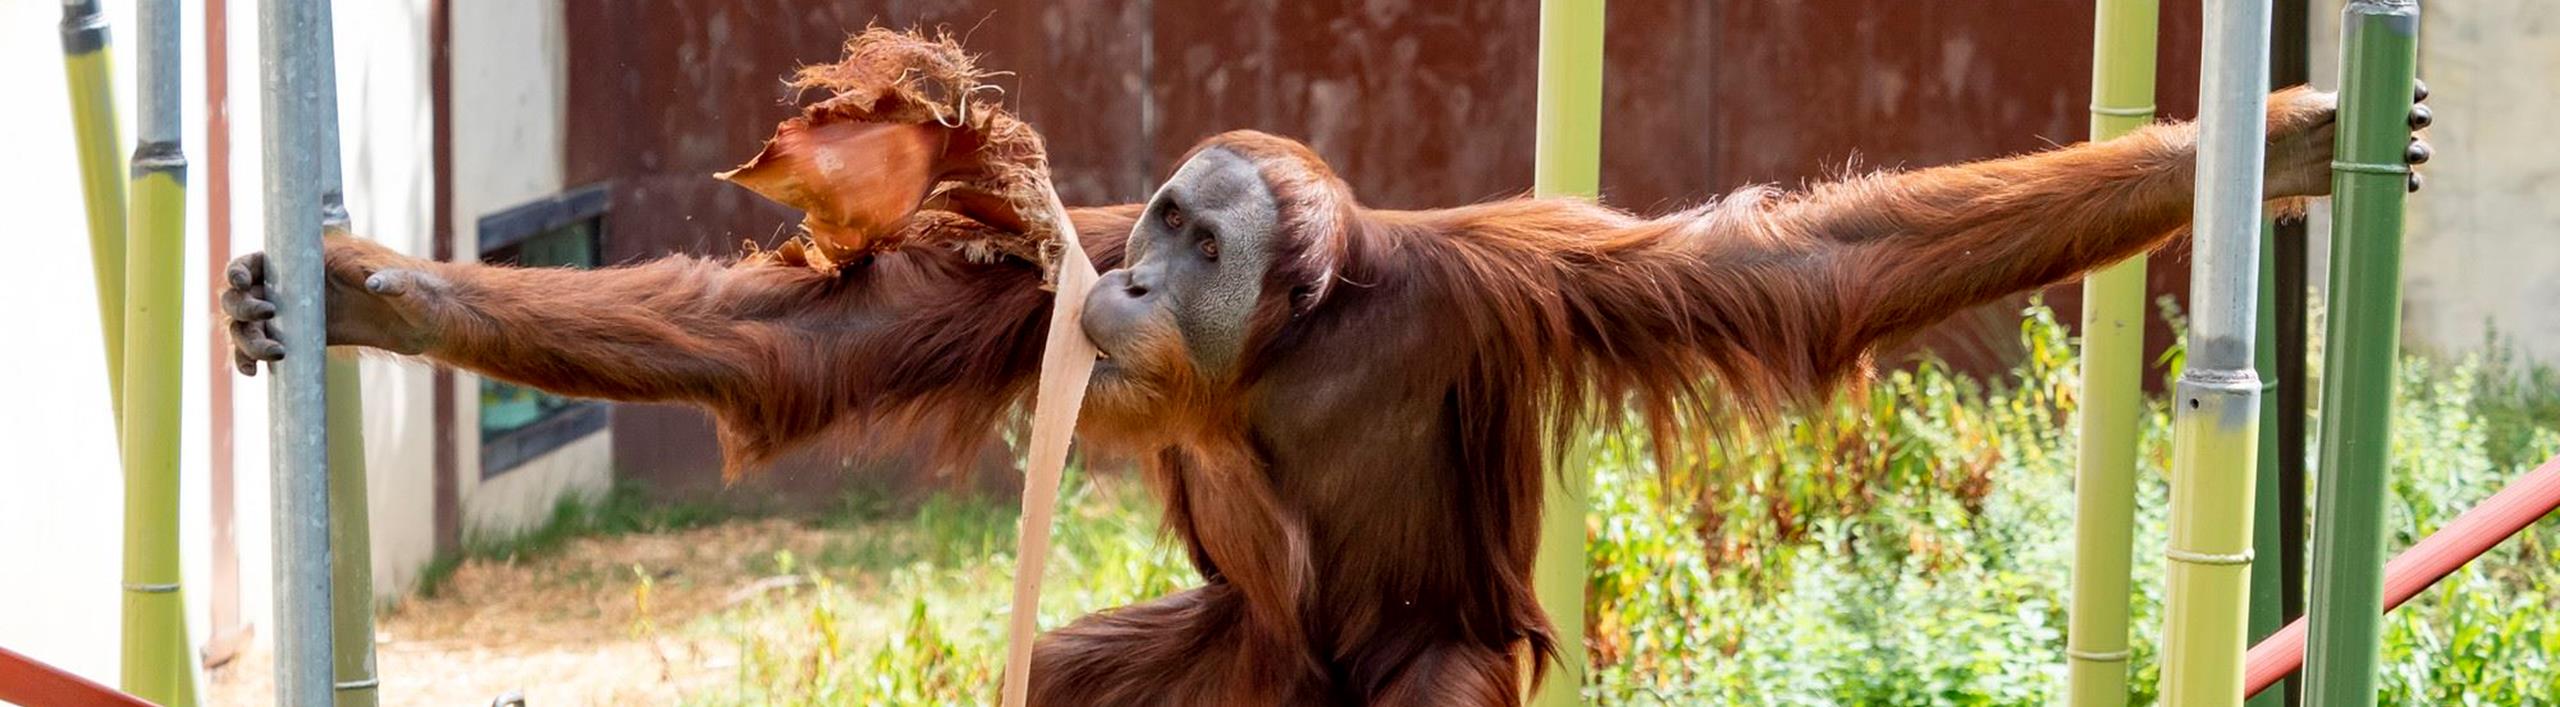 Orang-utan swinging between poles while holding a palm fond in its mouth.